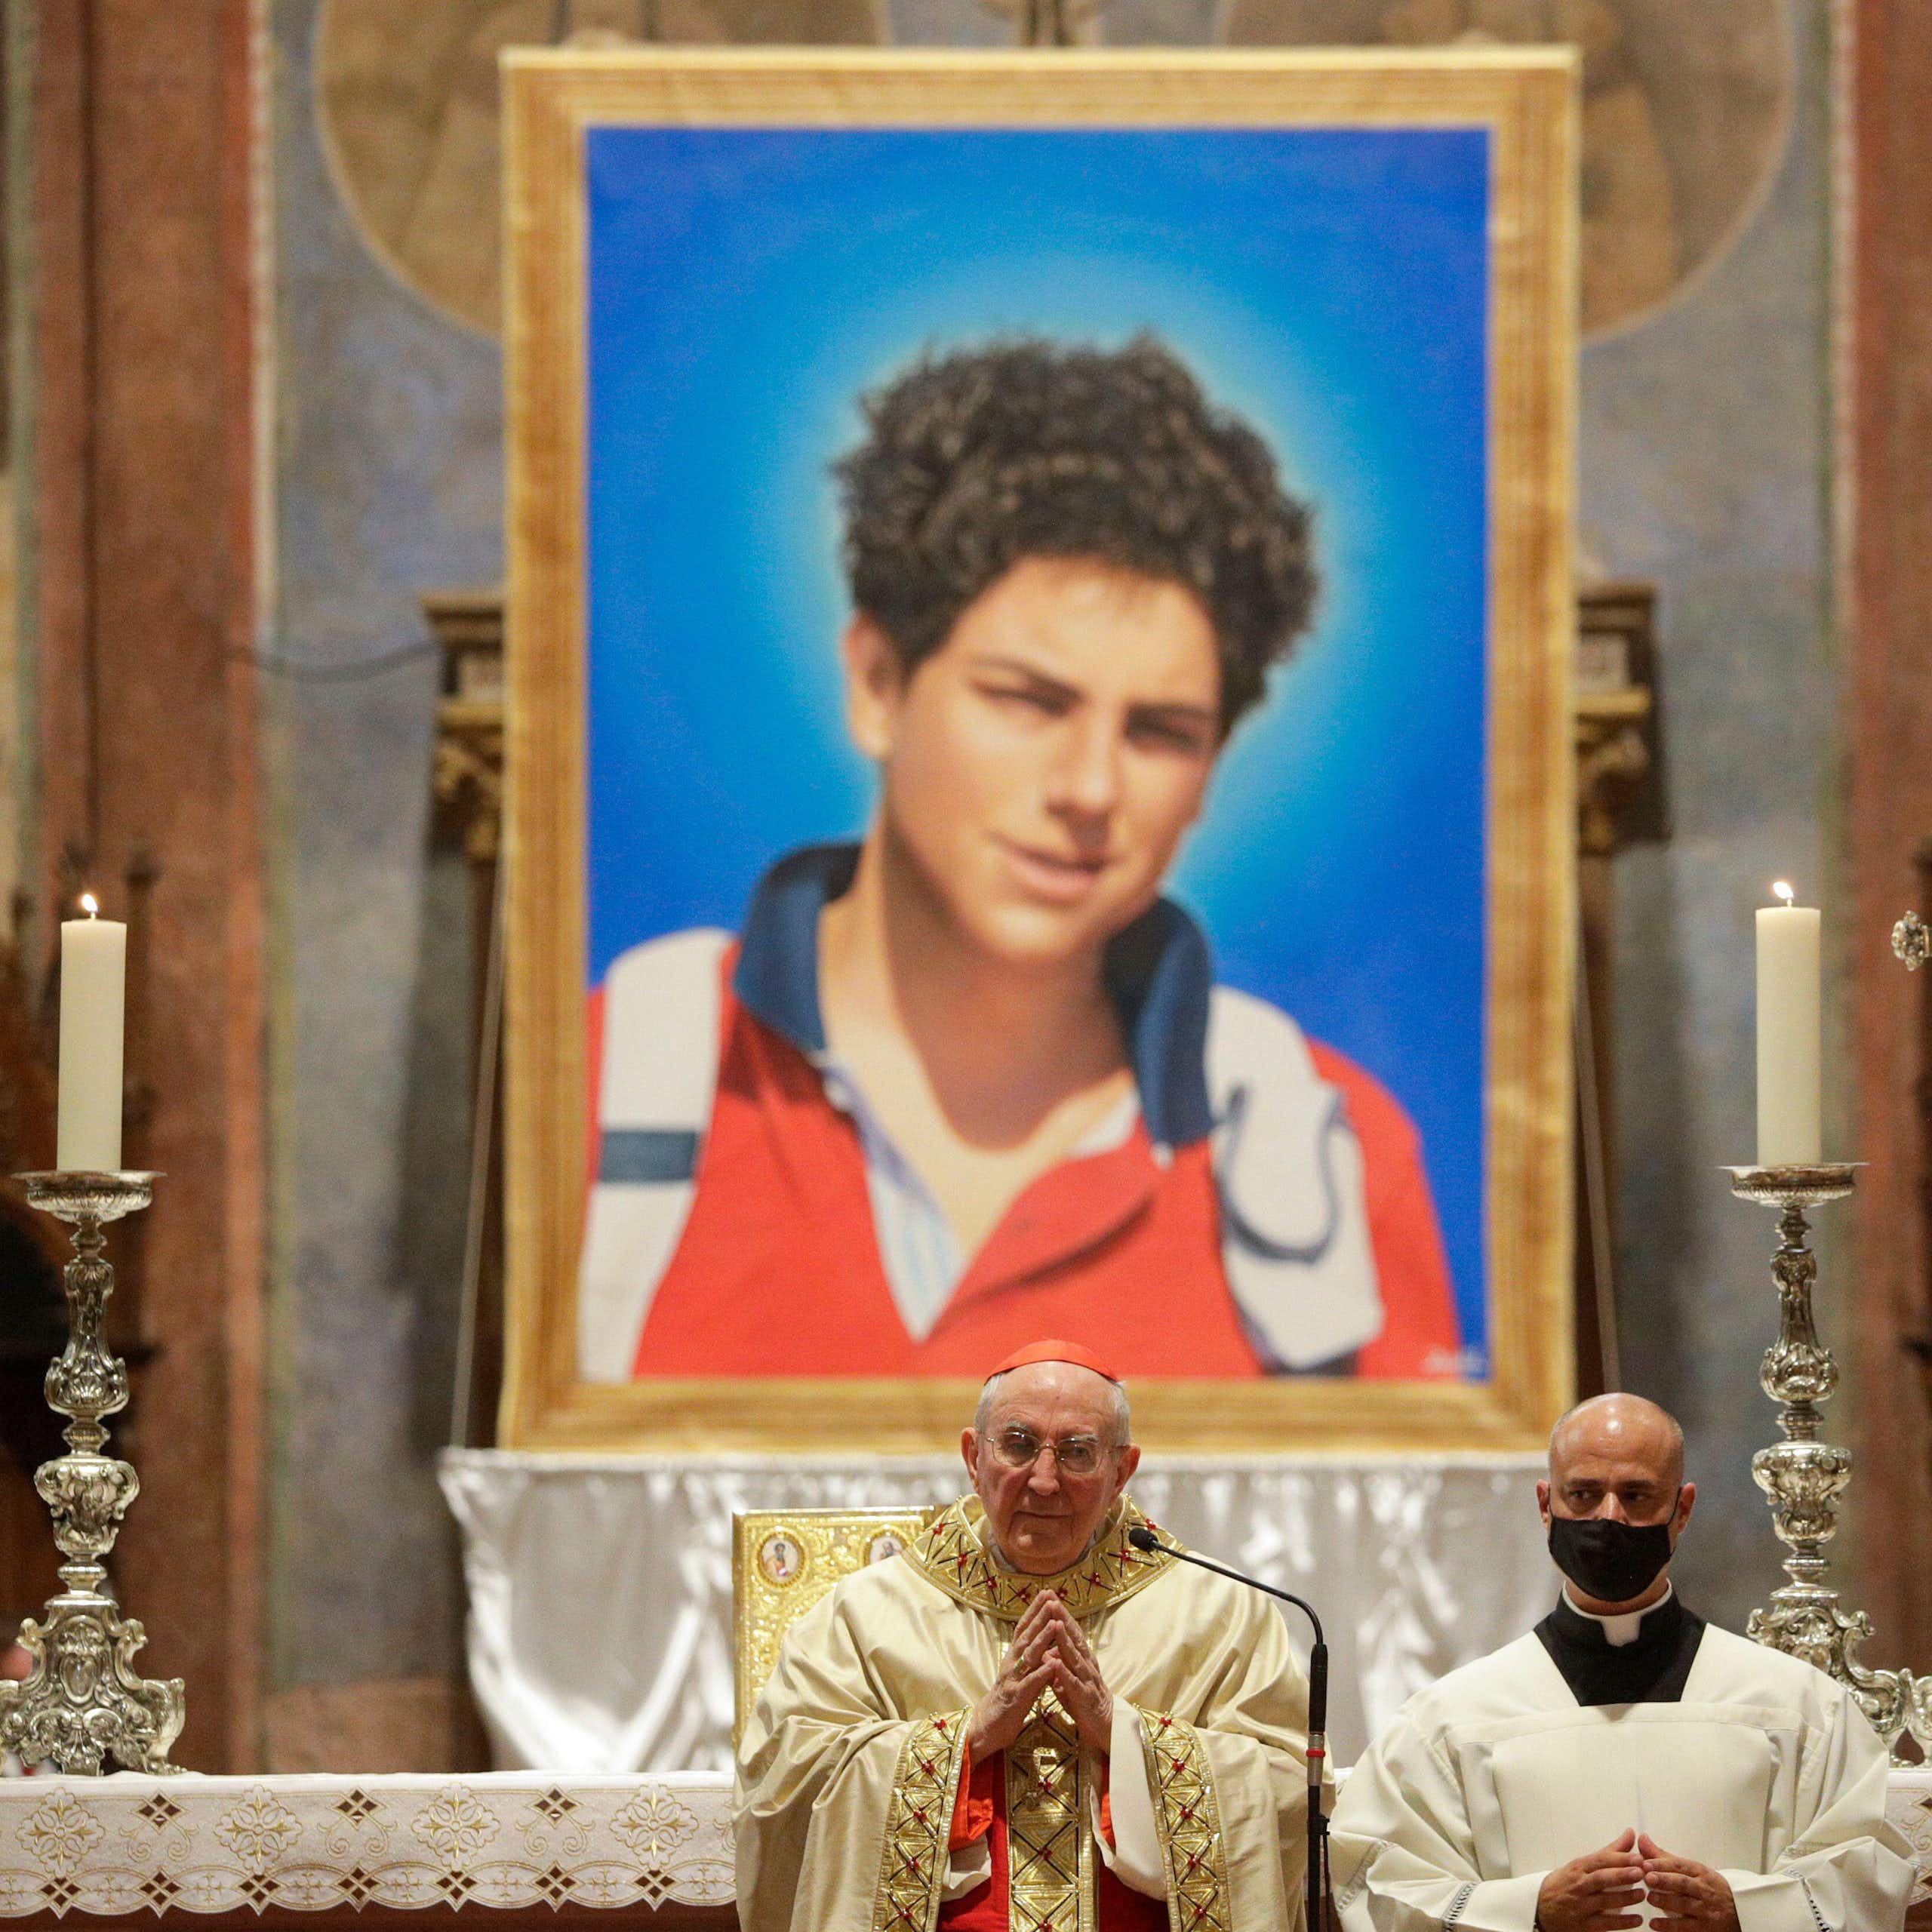 The Pope in front of an altar with a huge picture of Carlo Acutis on it.